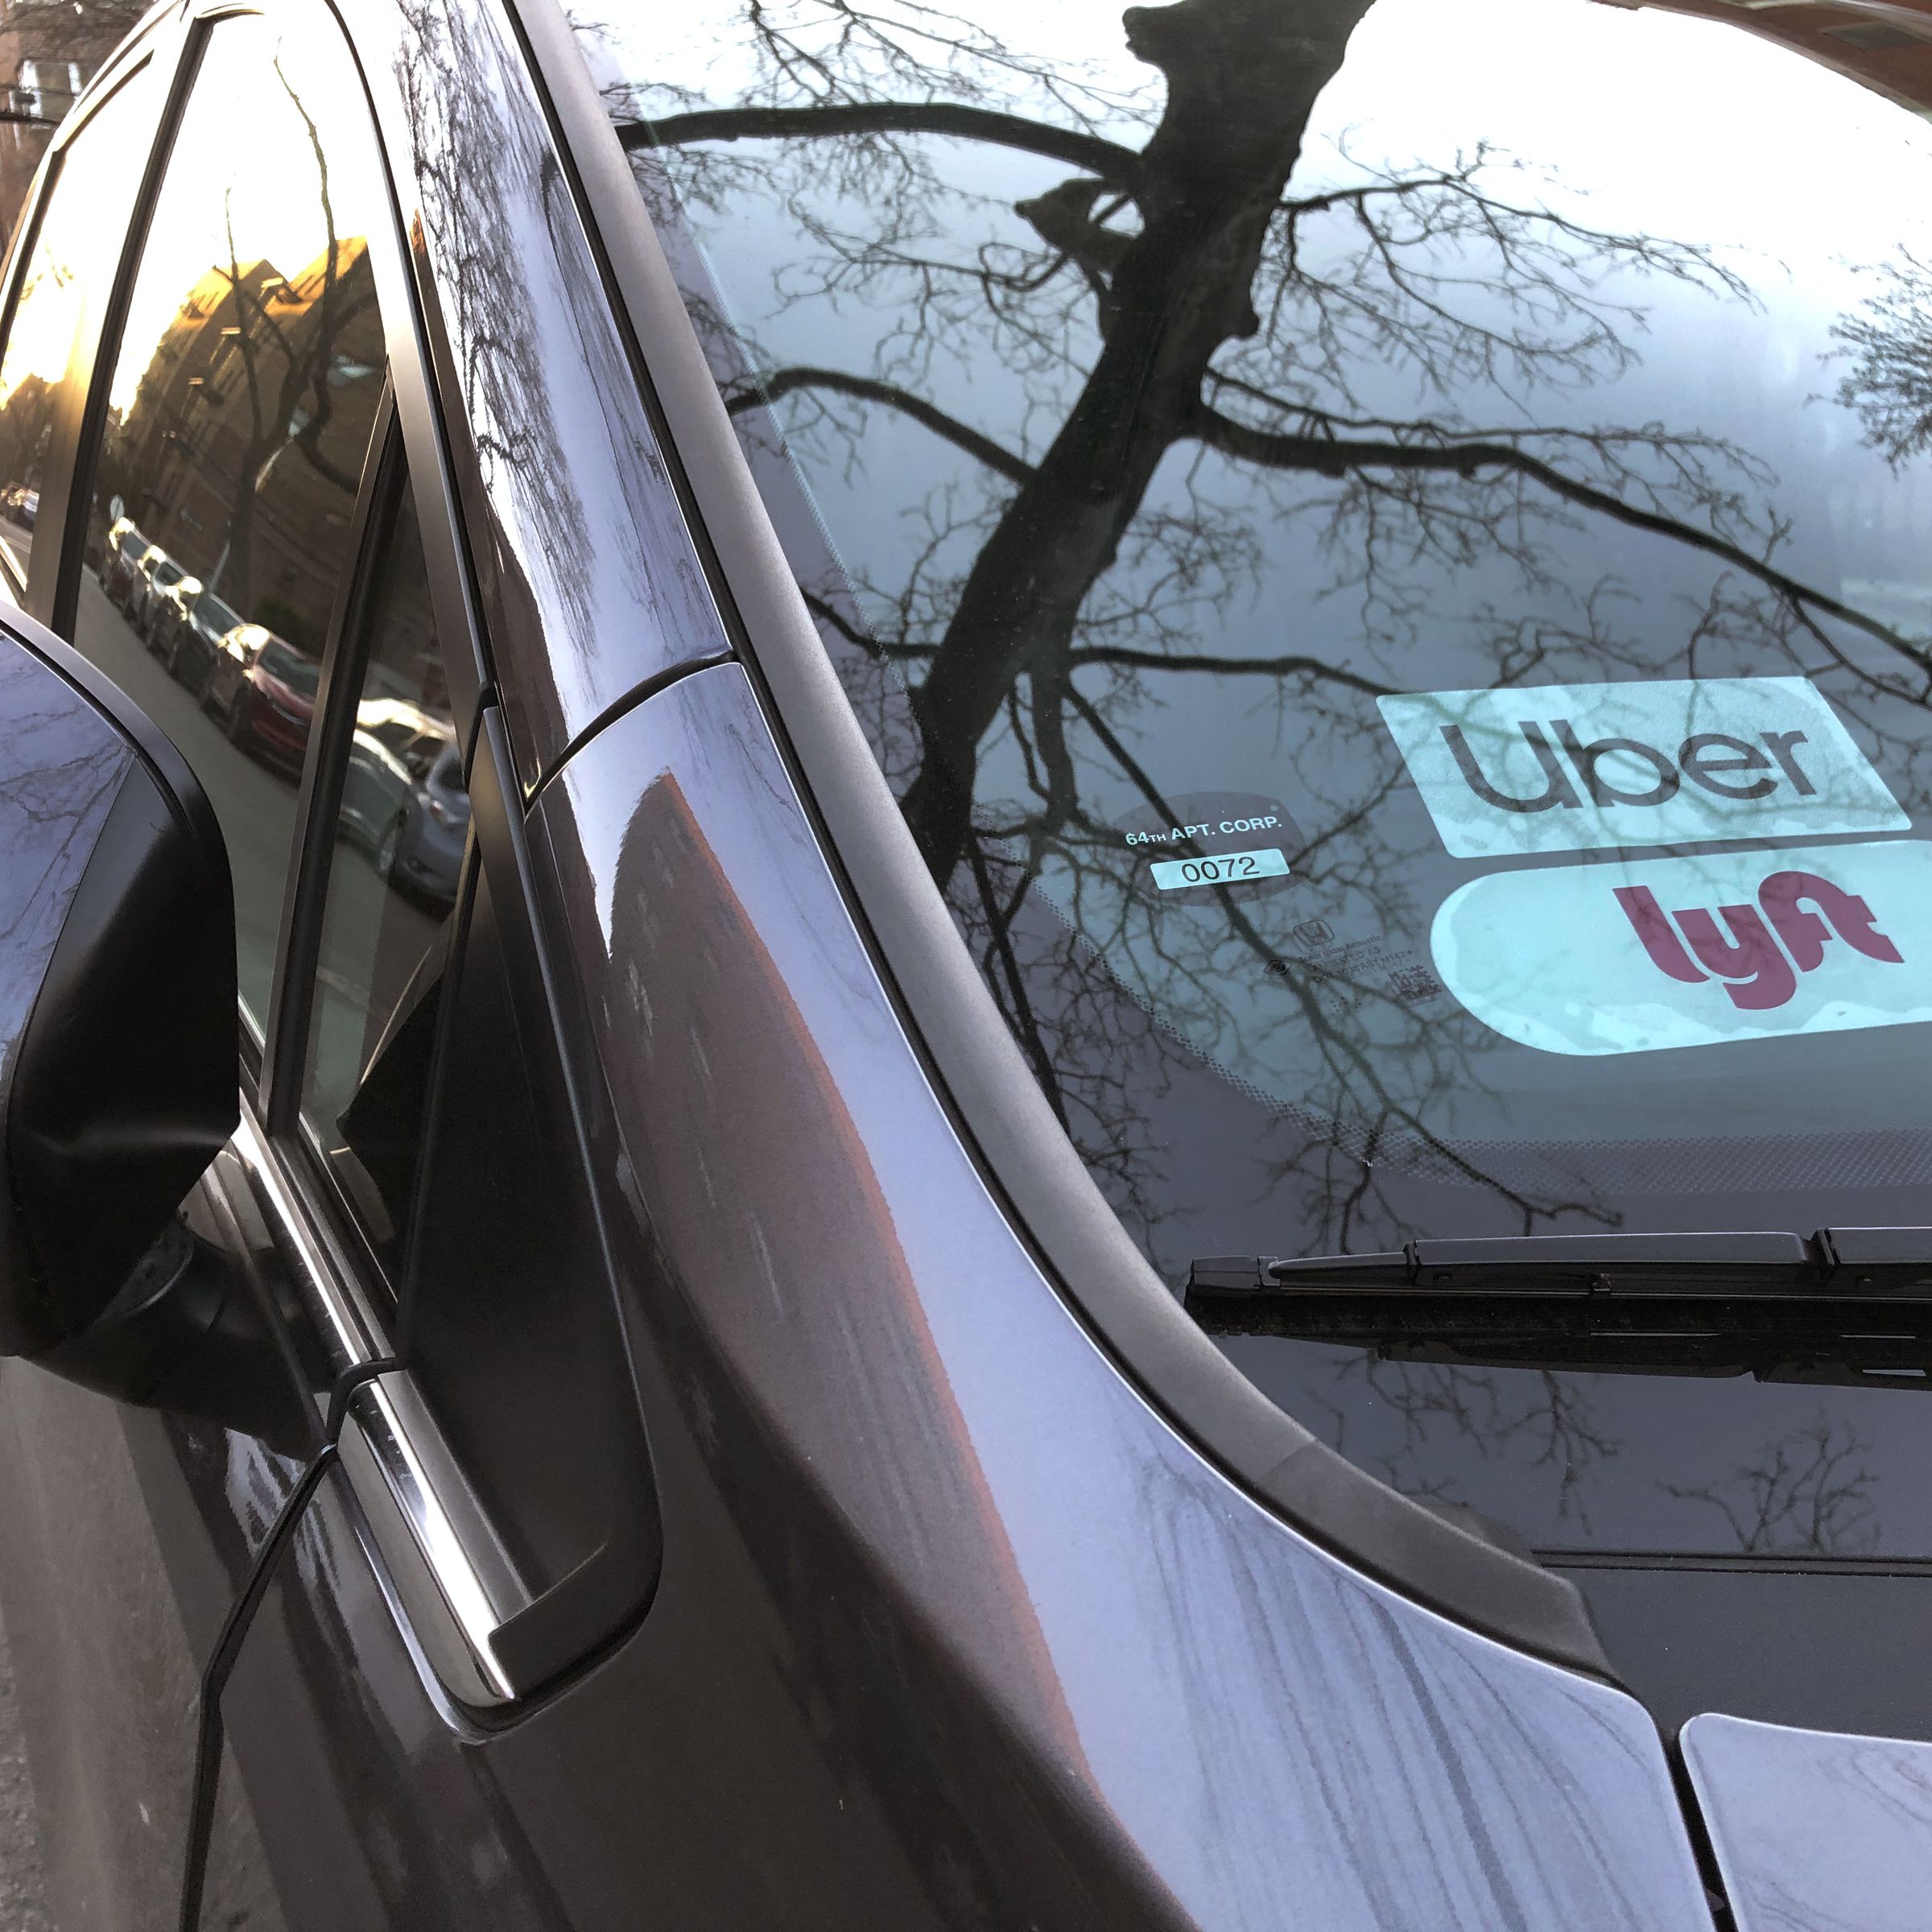 Uber and Lyft sign in windshield of car, Queens, New York